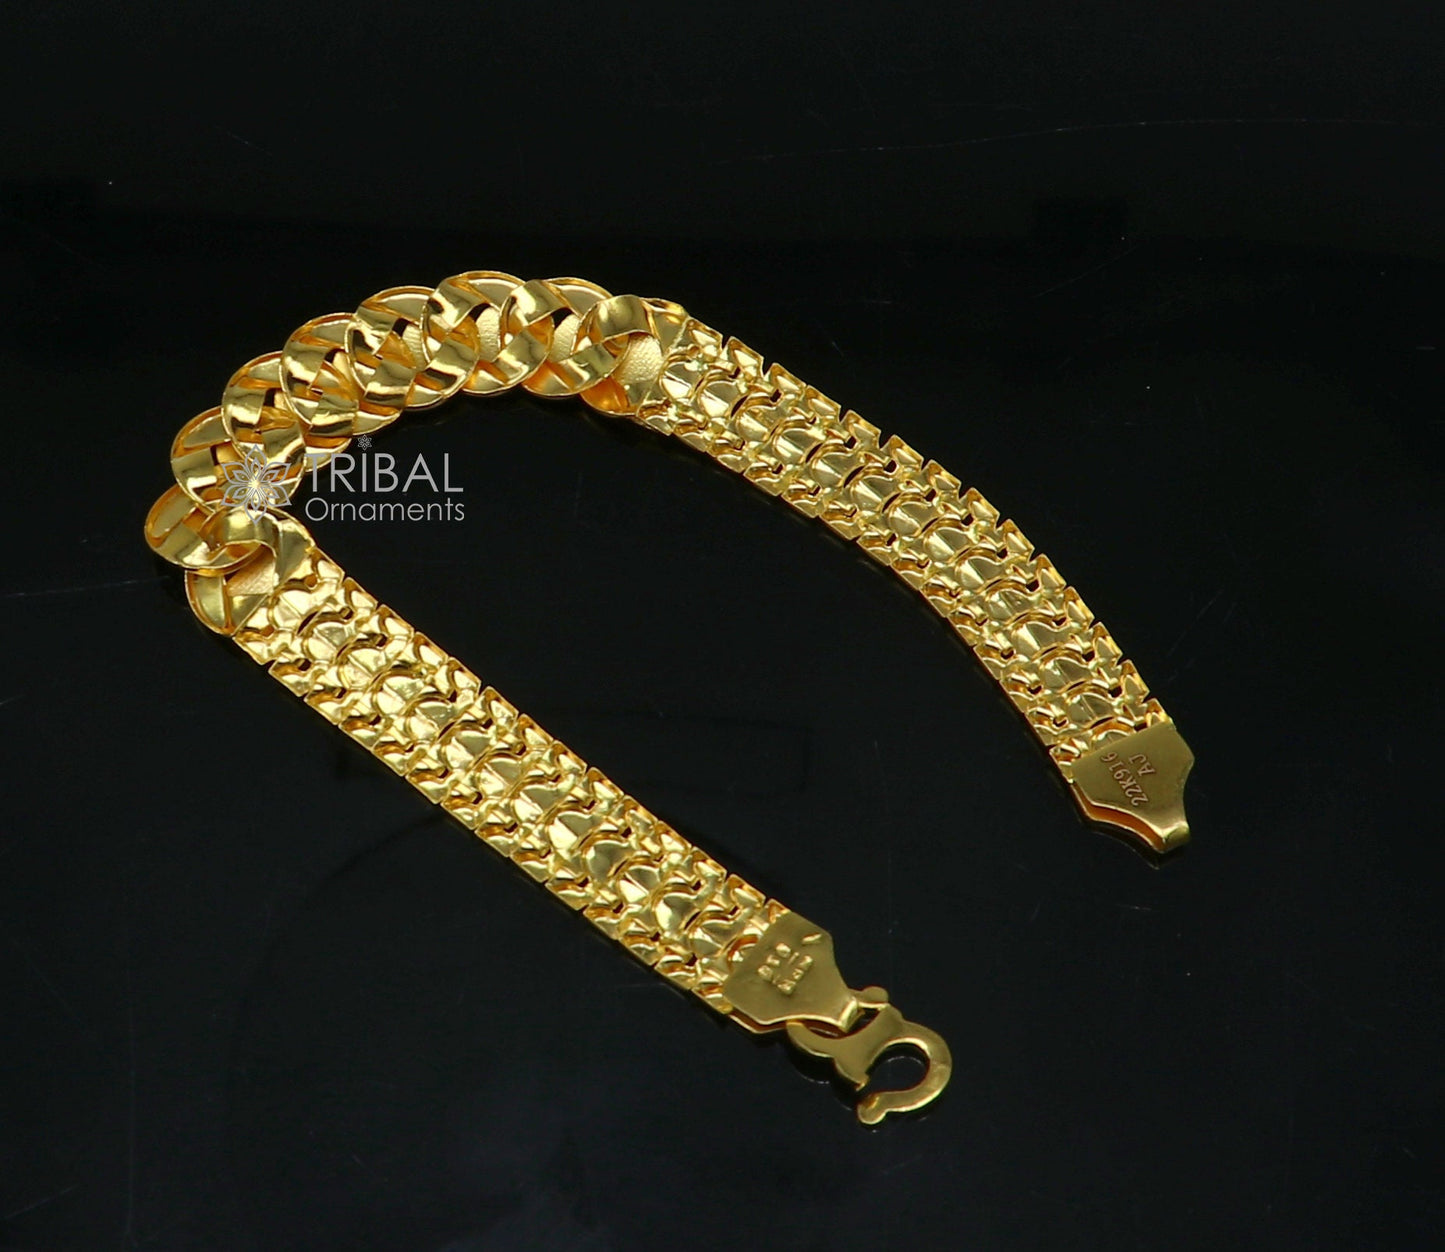 22 kt yellow gold handmade customized unique Fancy design stylish bracelet, best men's gifting for wedding functional jewelry gbr80 - TRIBAL ORNAMENTS